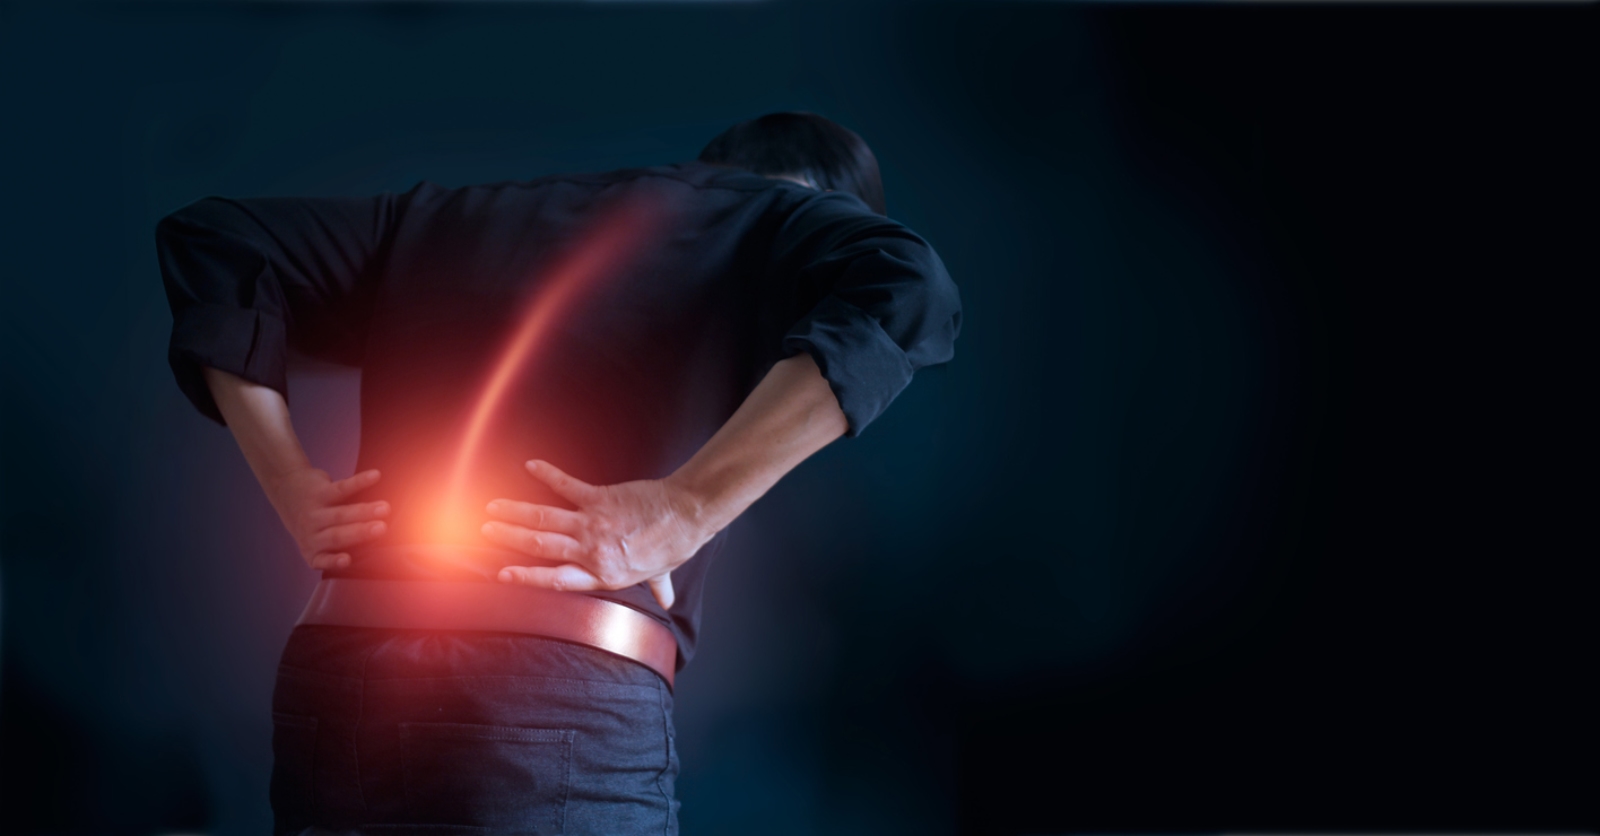 Electrotherapy: The Lower Back Pain Treatment You've Never Heard